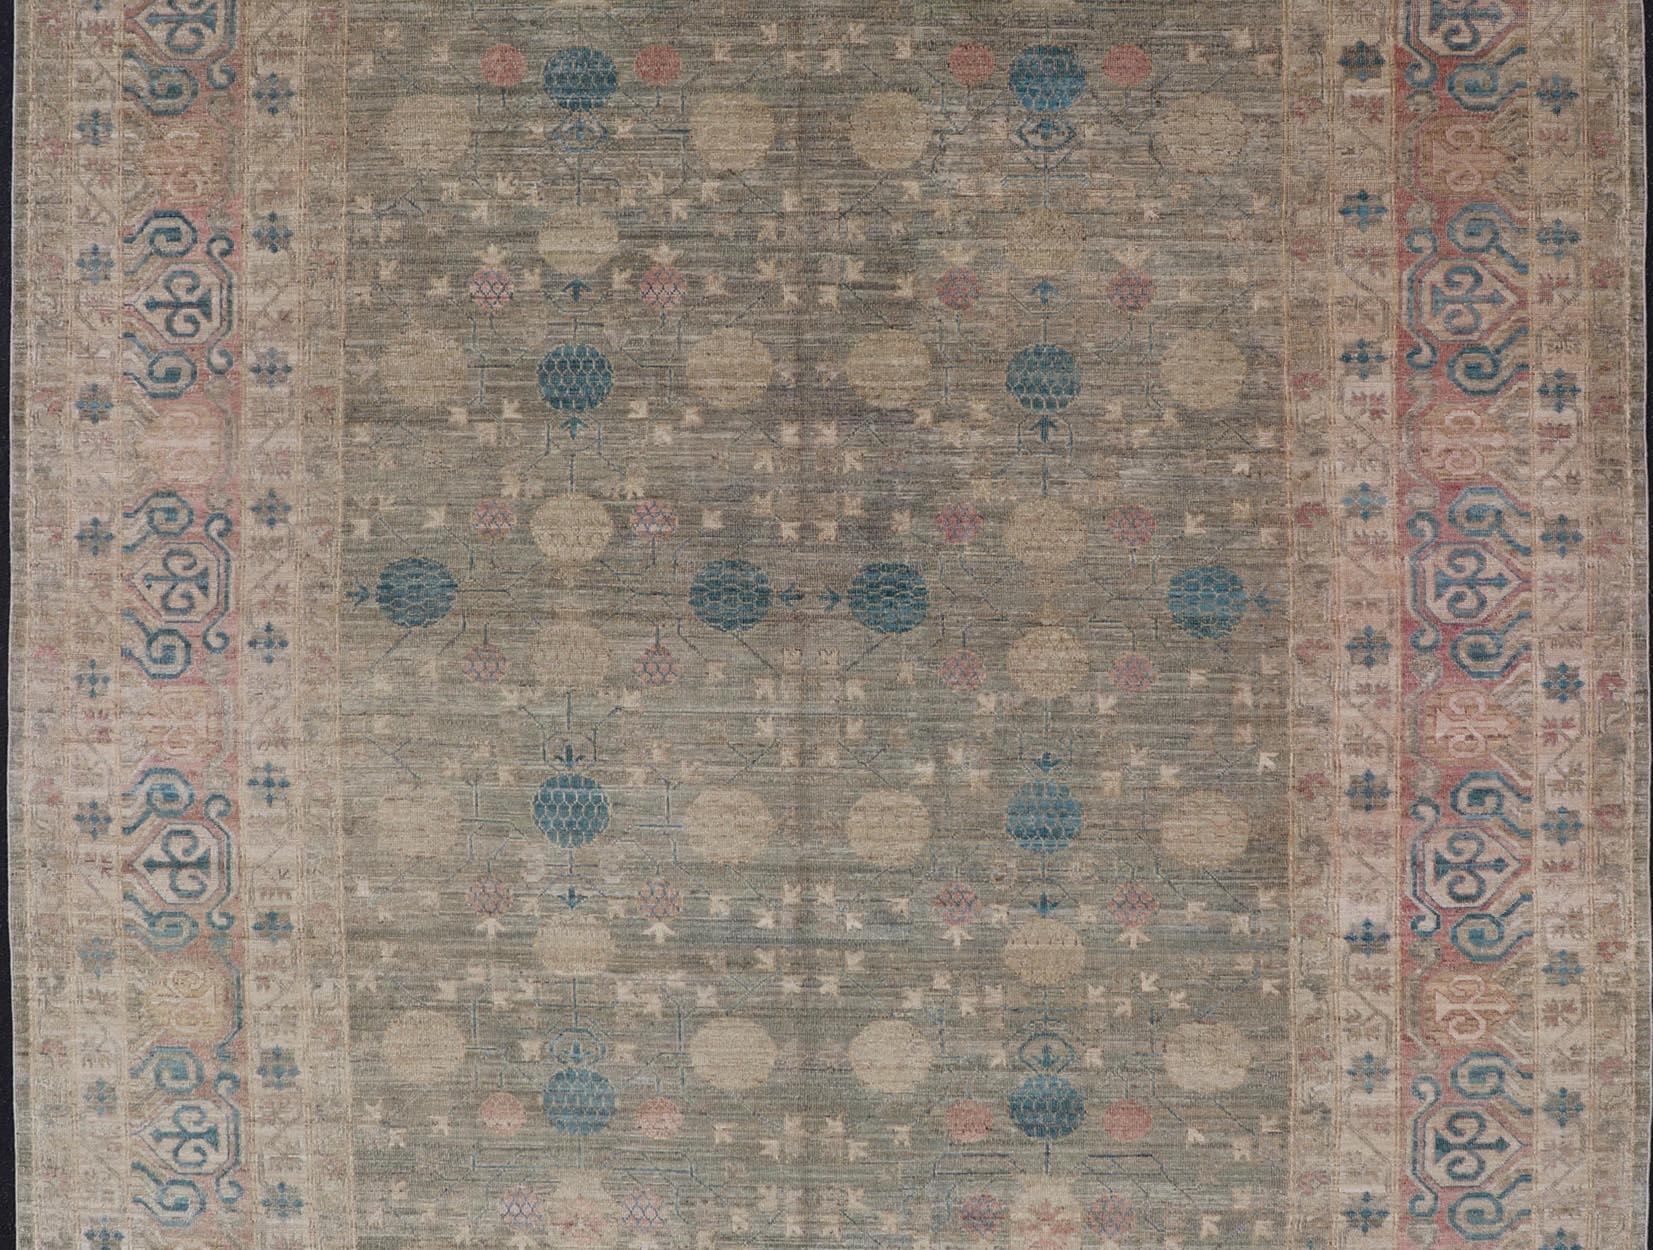 Hand-Knotted Large Modern Tribal Khotan Rug in Shades of Cream, Green, Blue, and Coral For Sale